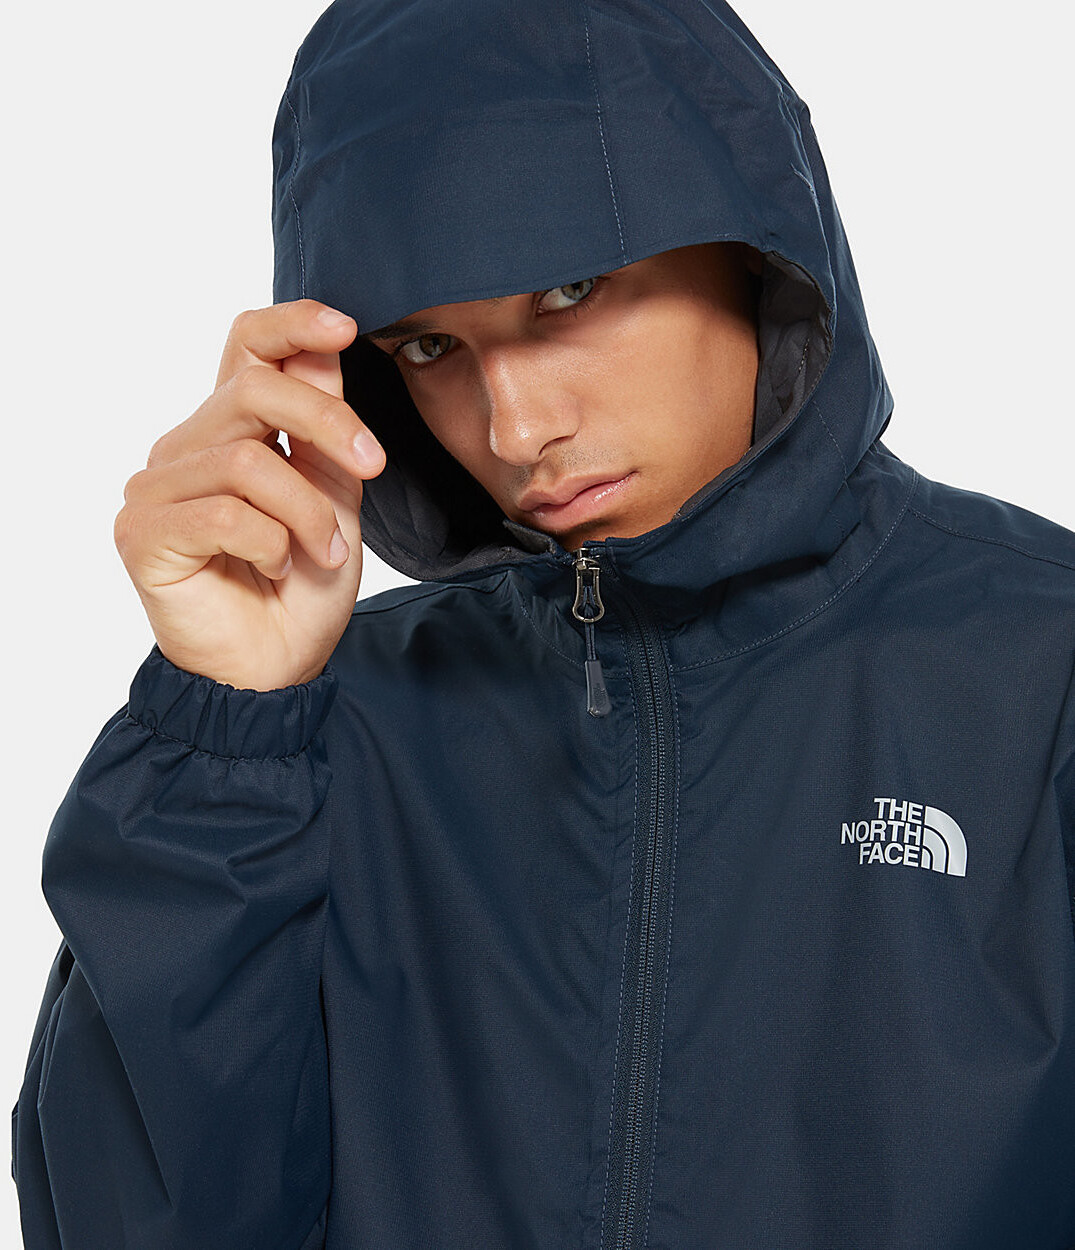 assistent pizza Klagen Buy The North Face Quest Jacket Men Urban Navy from £90.76 (Today) – Best  Deals on idealo.co.uk